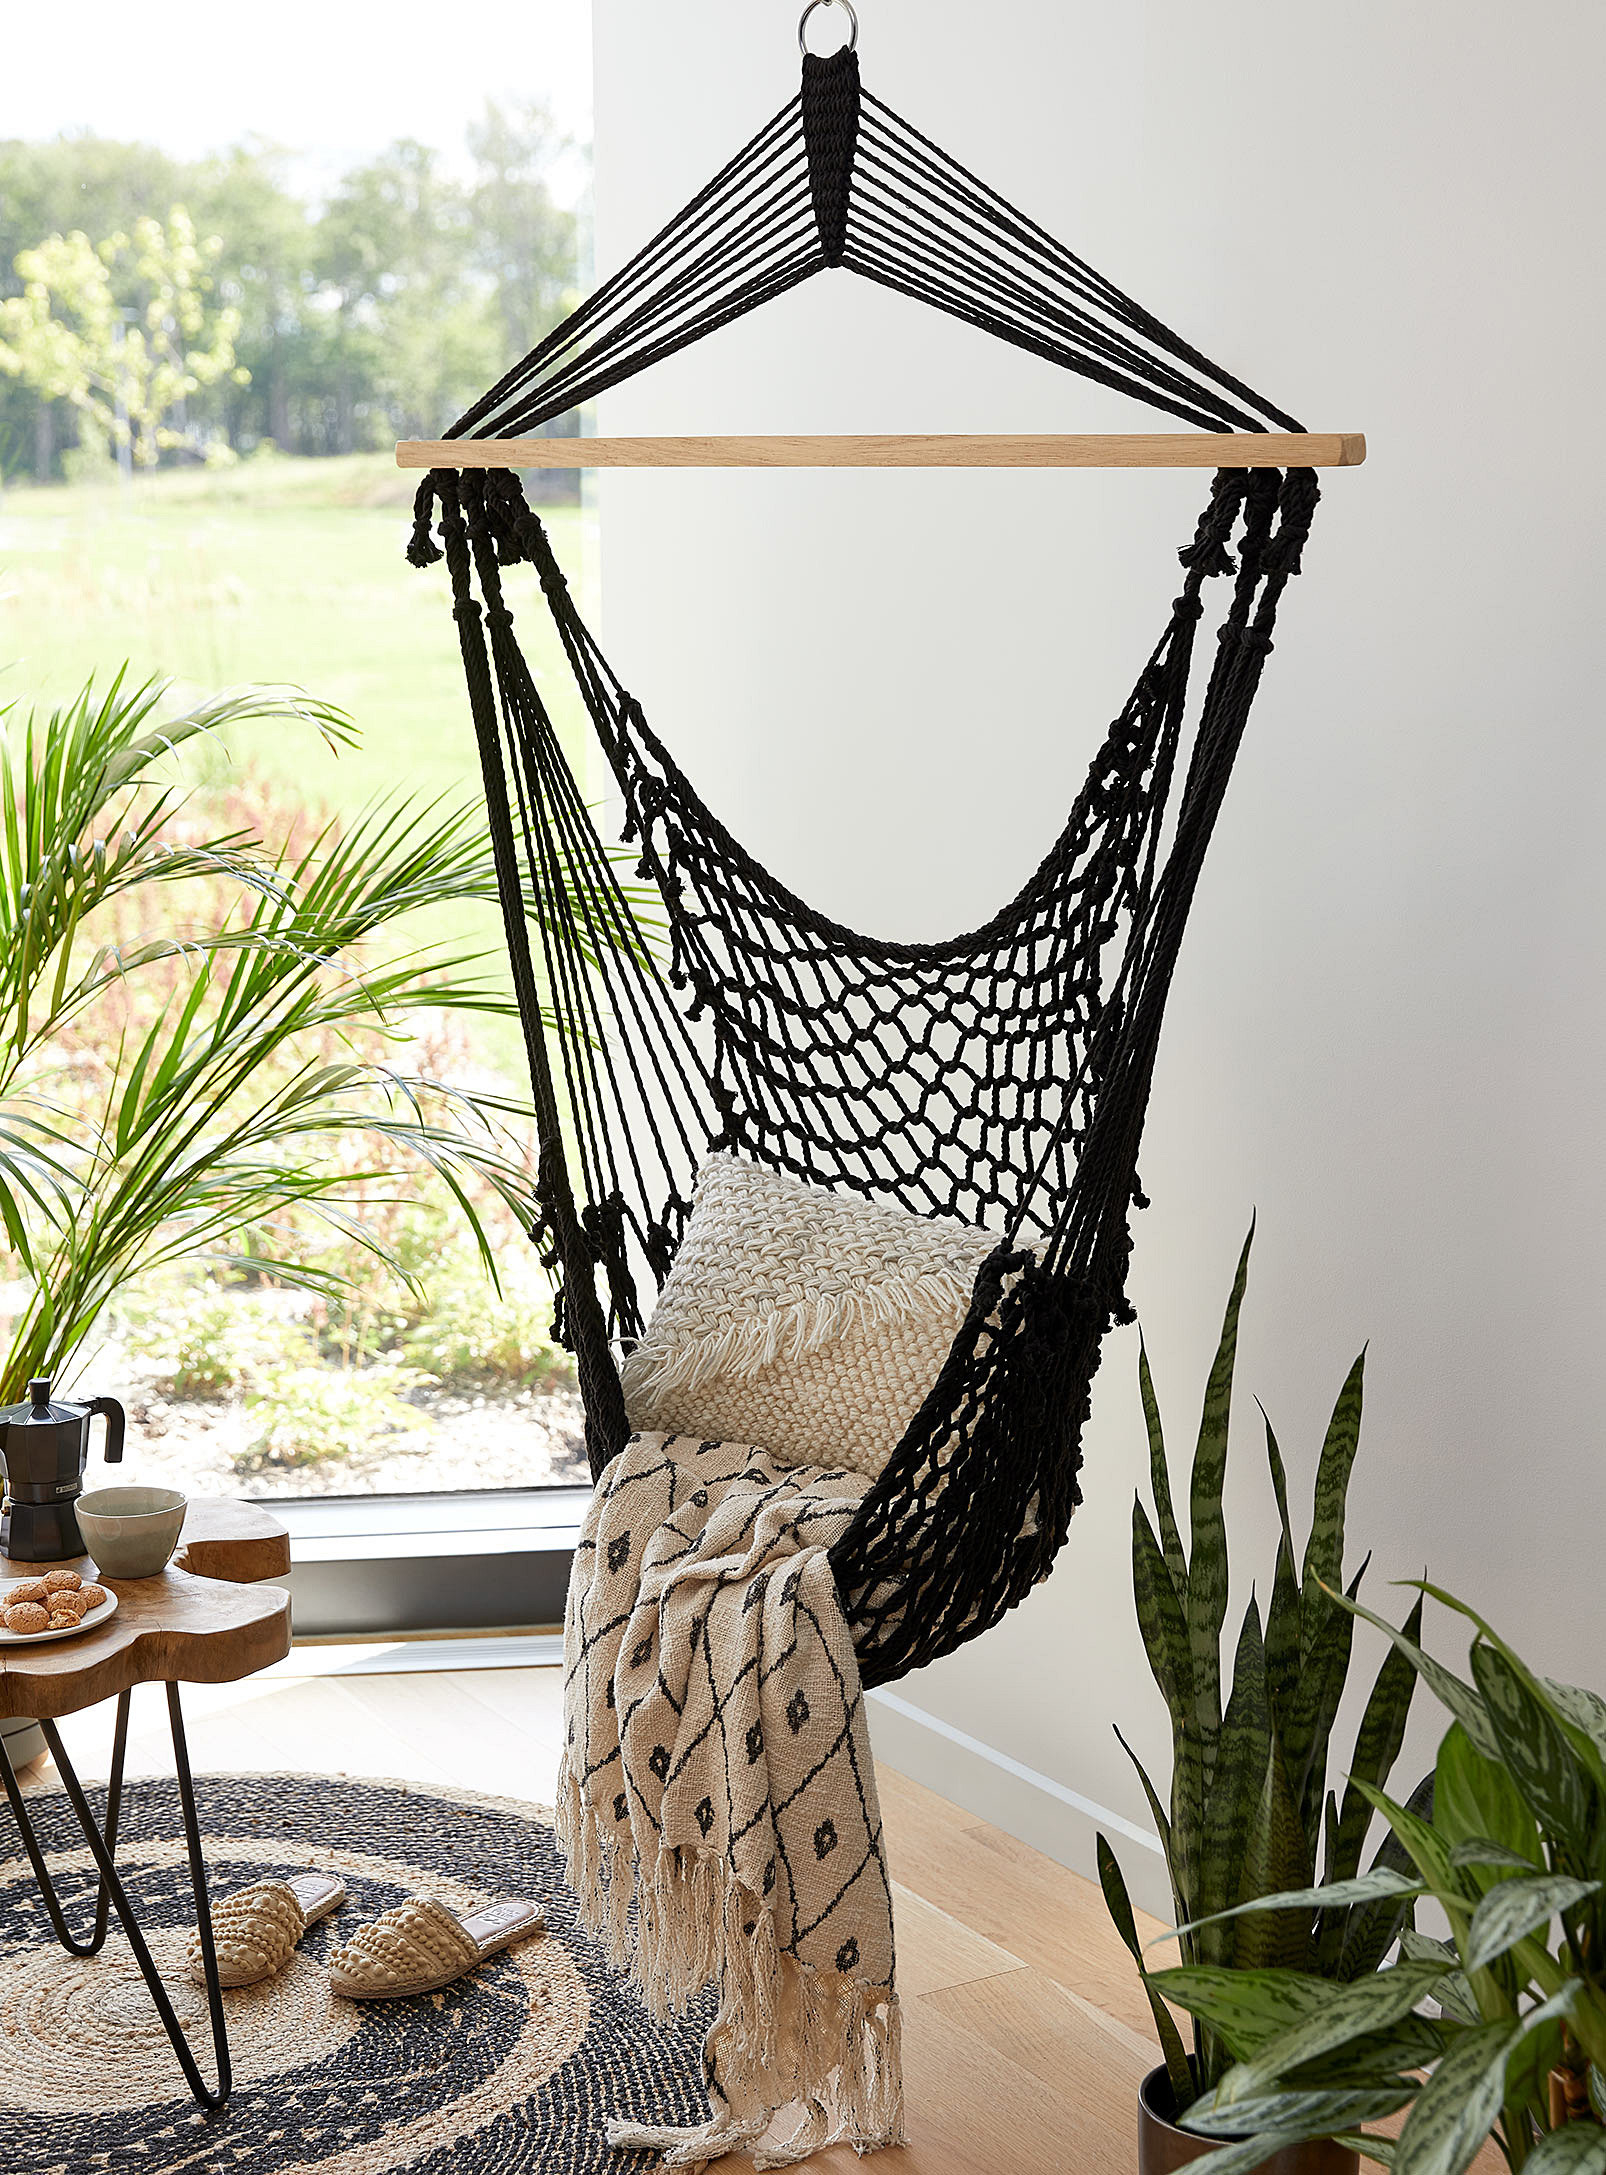 A crochet hammock hanging from a ceiling with a blanket and throw pillow resting